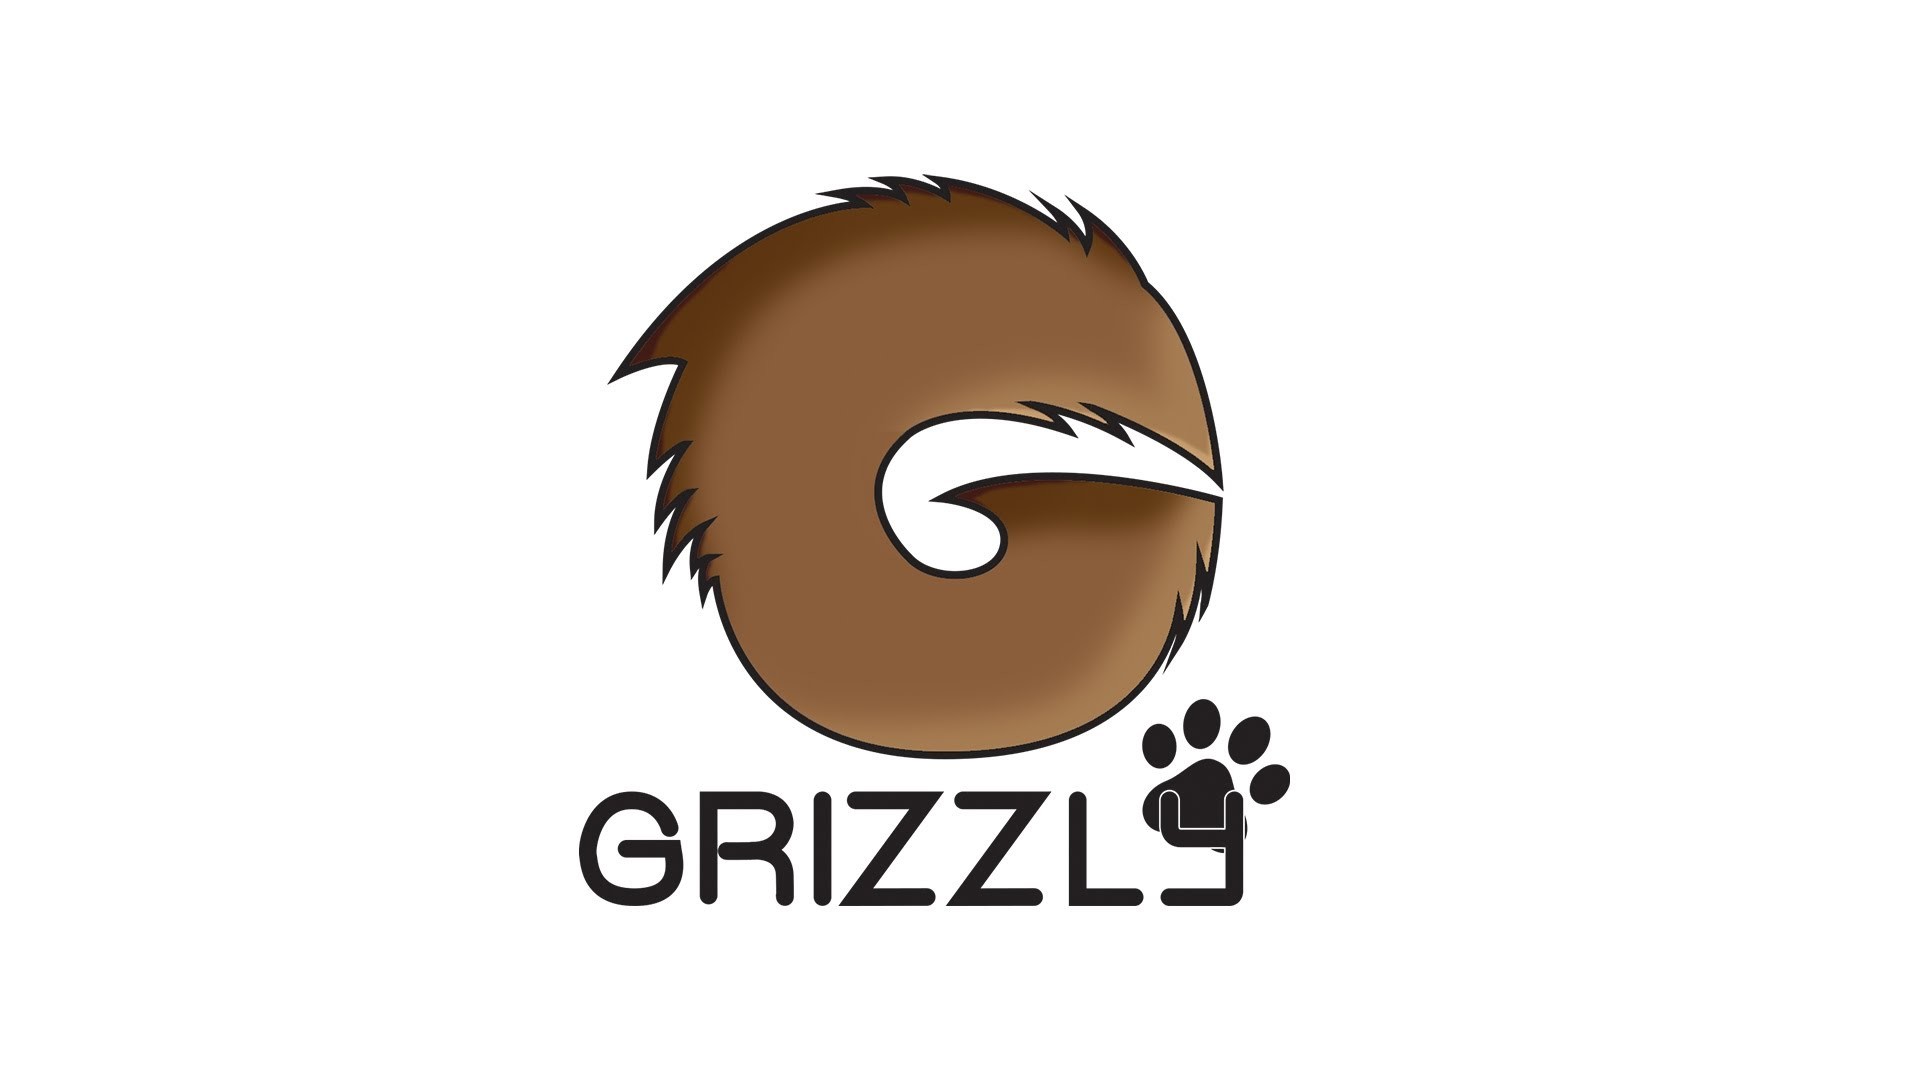 1920x1080 Grizzly Graphic Designs | Grizzly Logo